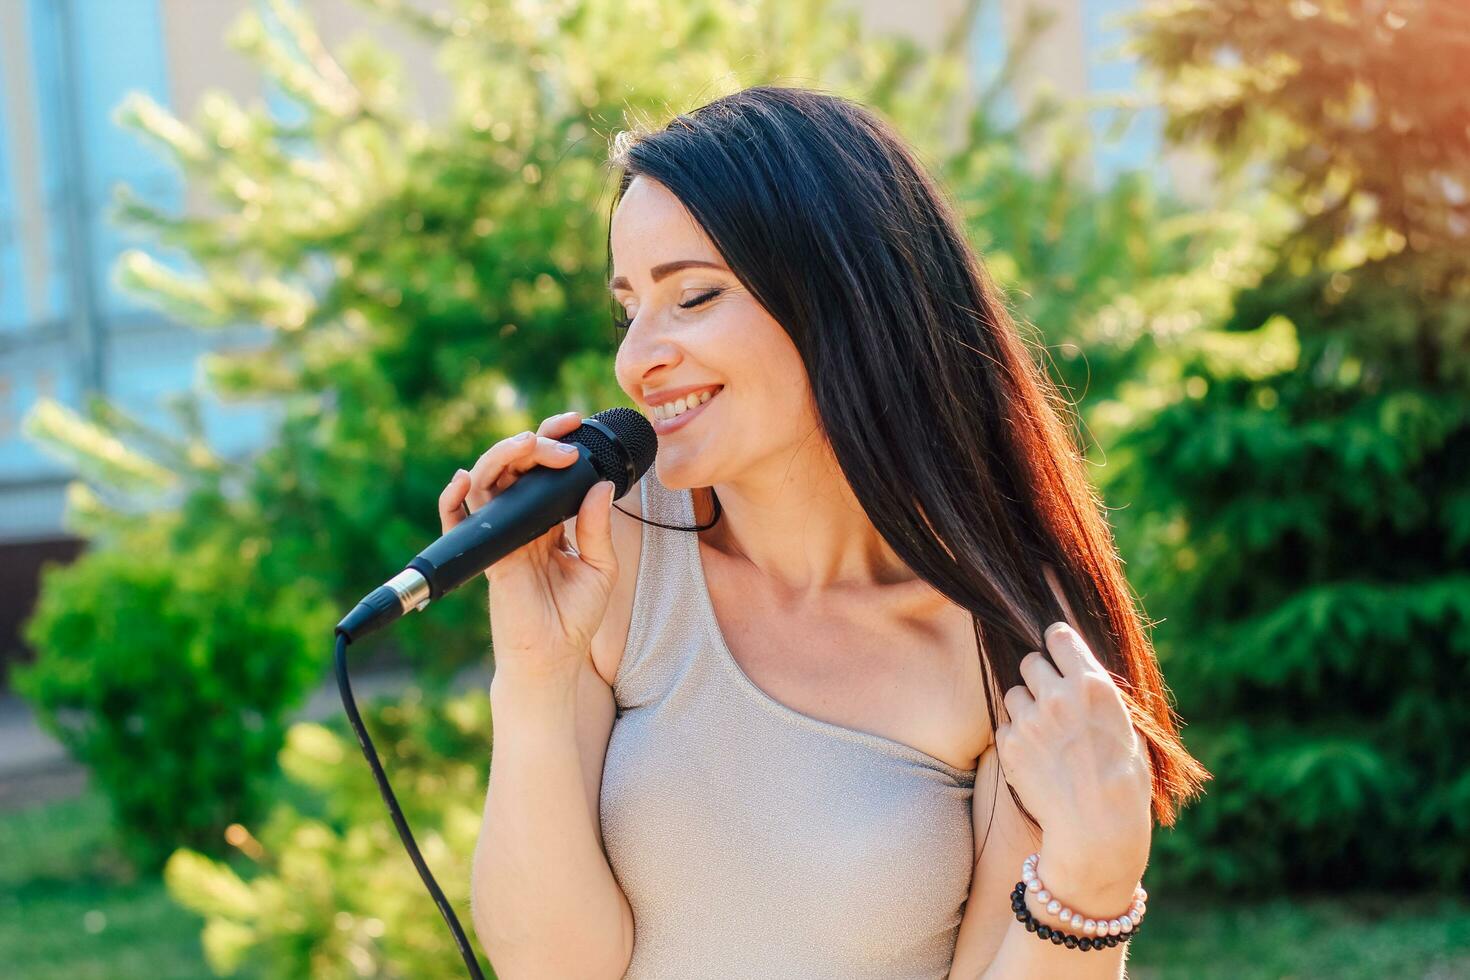 Woman vocalist with dark hair in a dress sings into a microphone photo